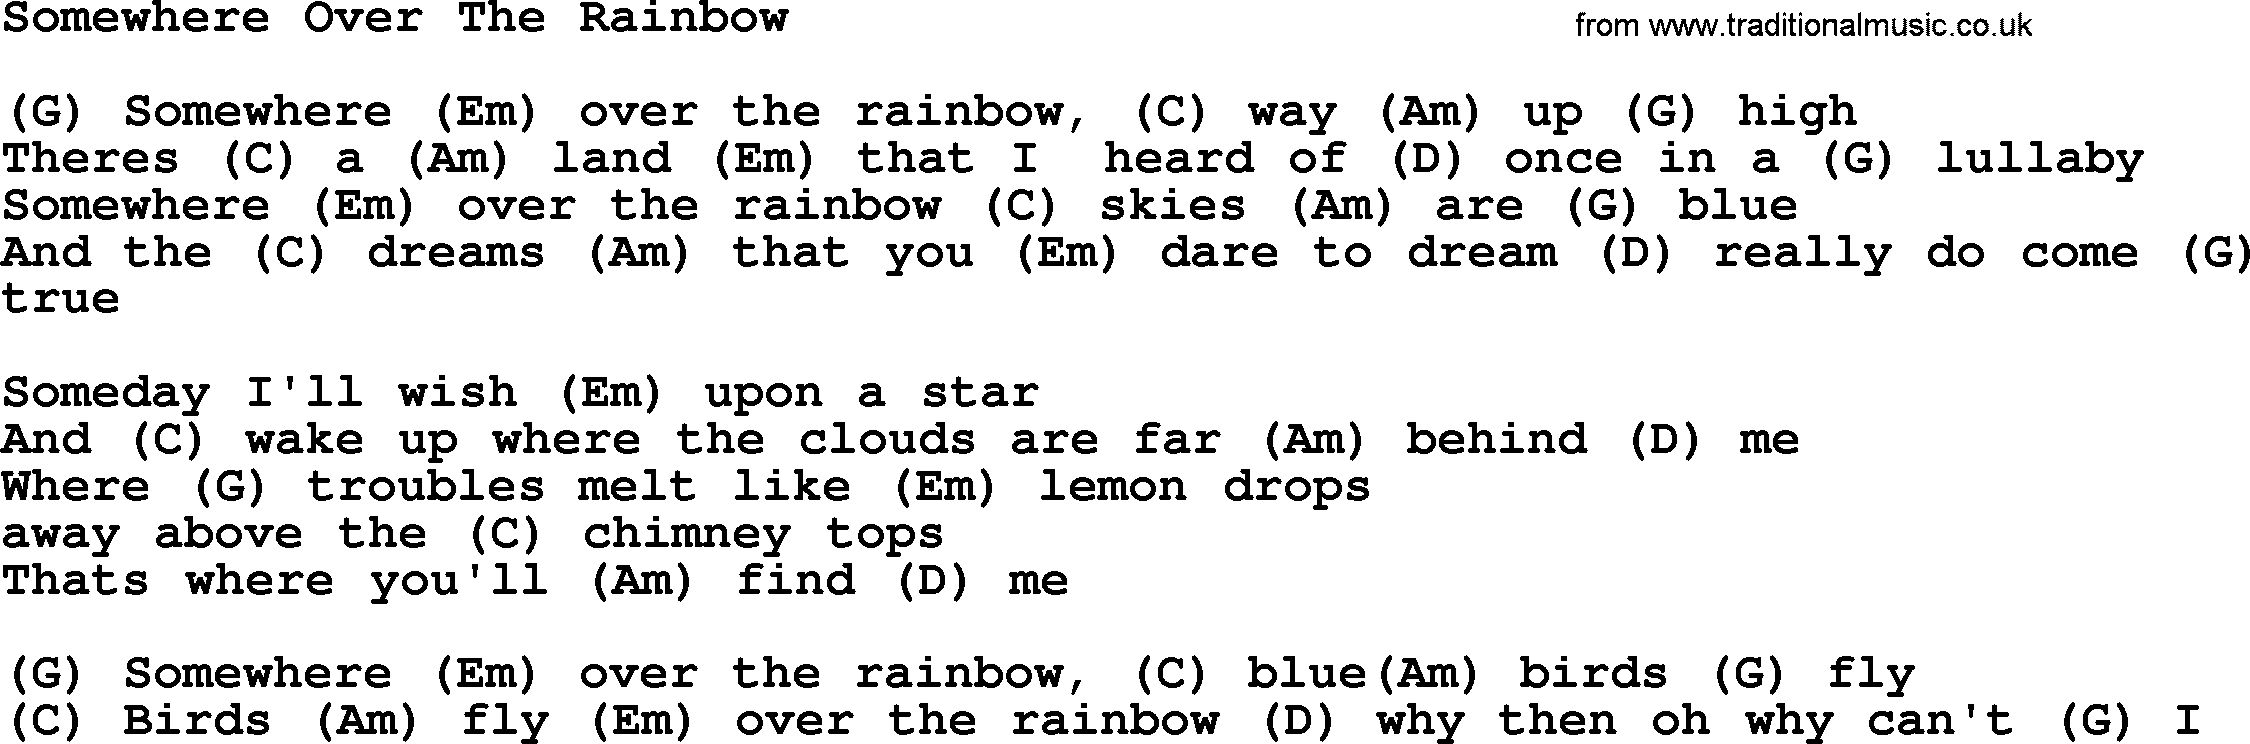 Somewhere Over The Rainbow Chords Willie Nelson Song Somewhere Over The Rainbow Lyrics And Chords